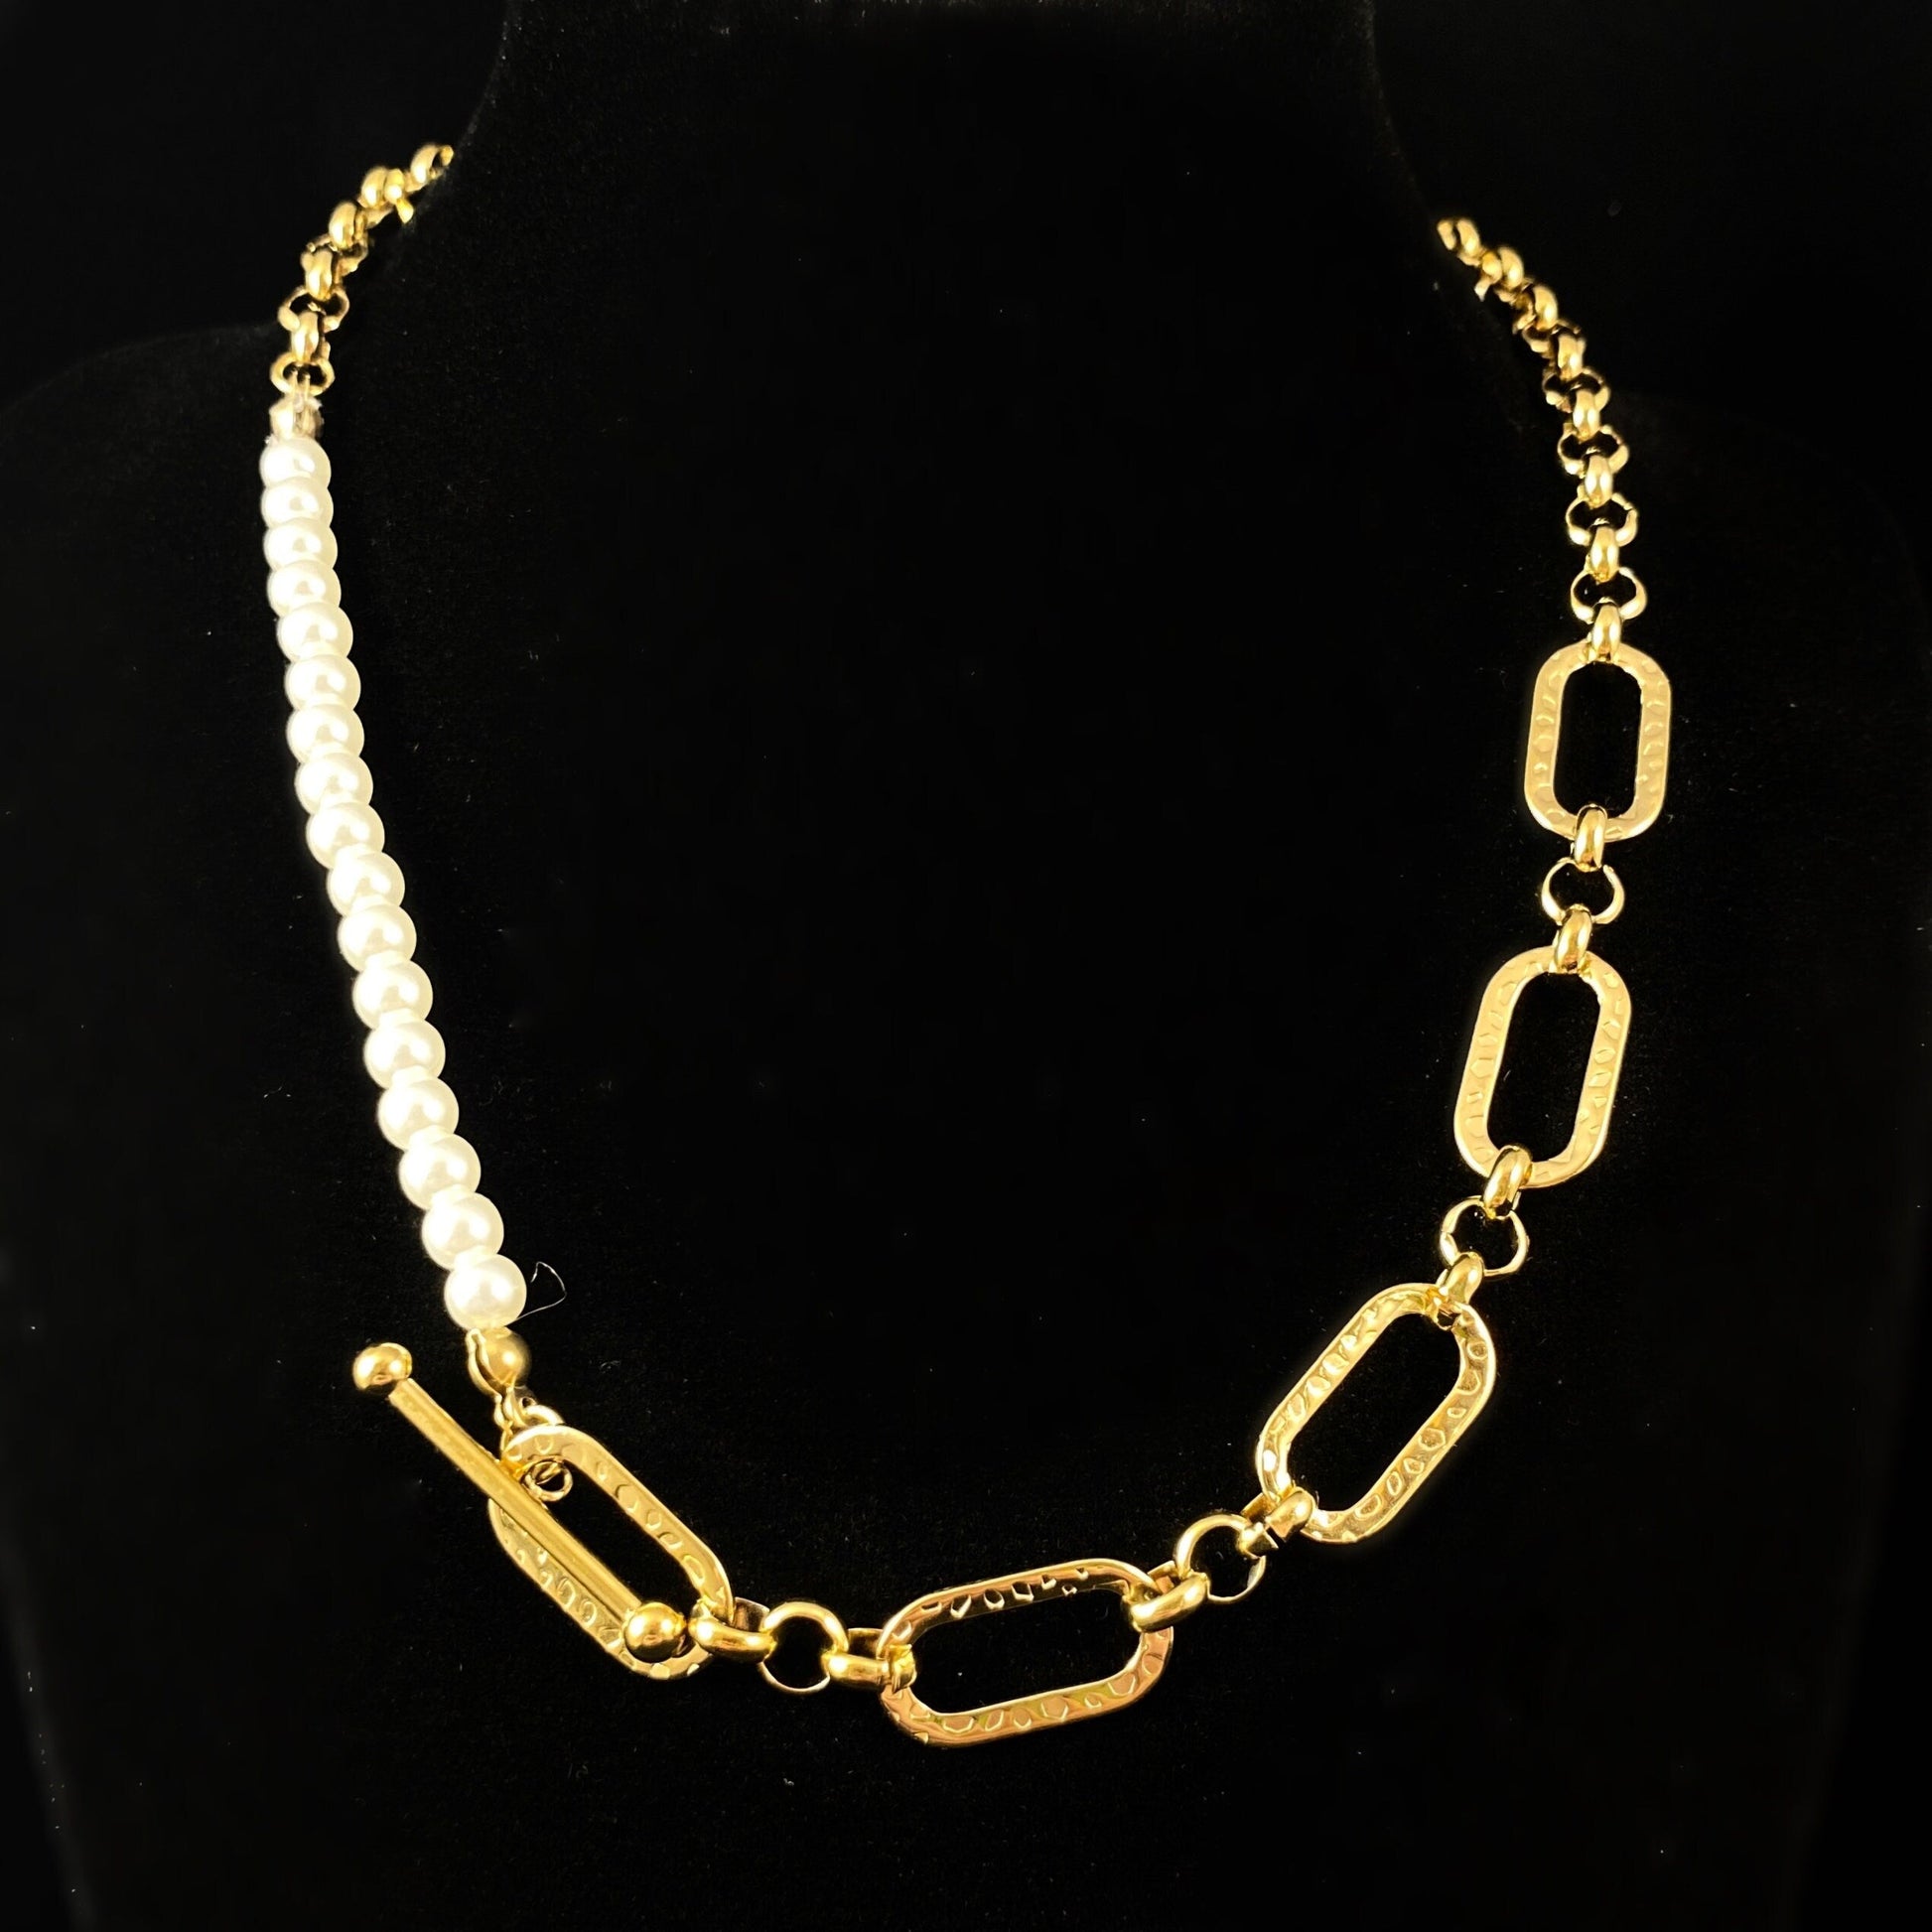 White Pearl Necklace with Decorative Chain Link Toggle Clasp